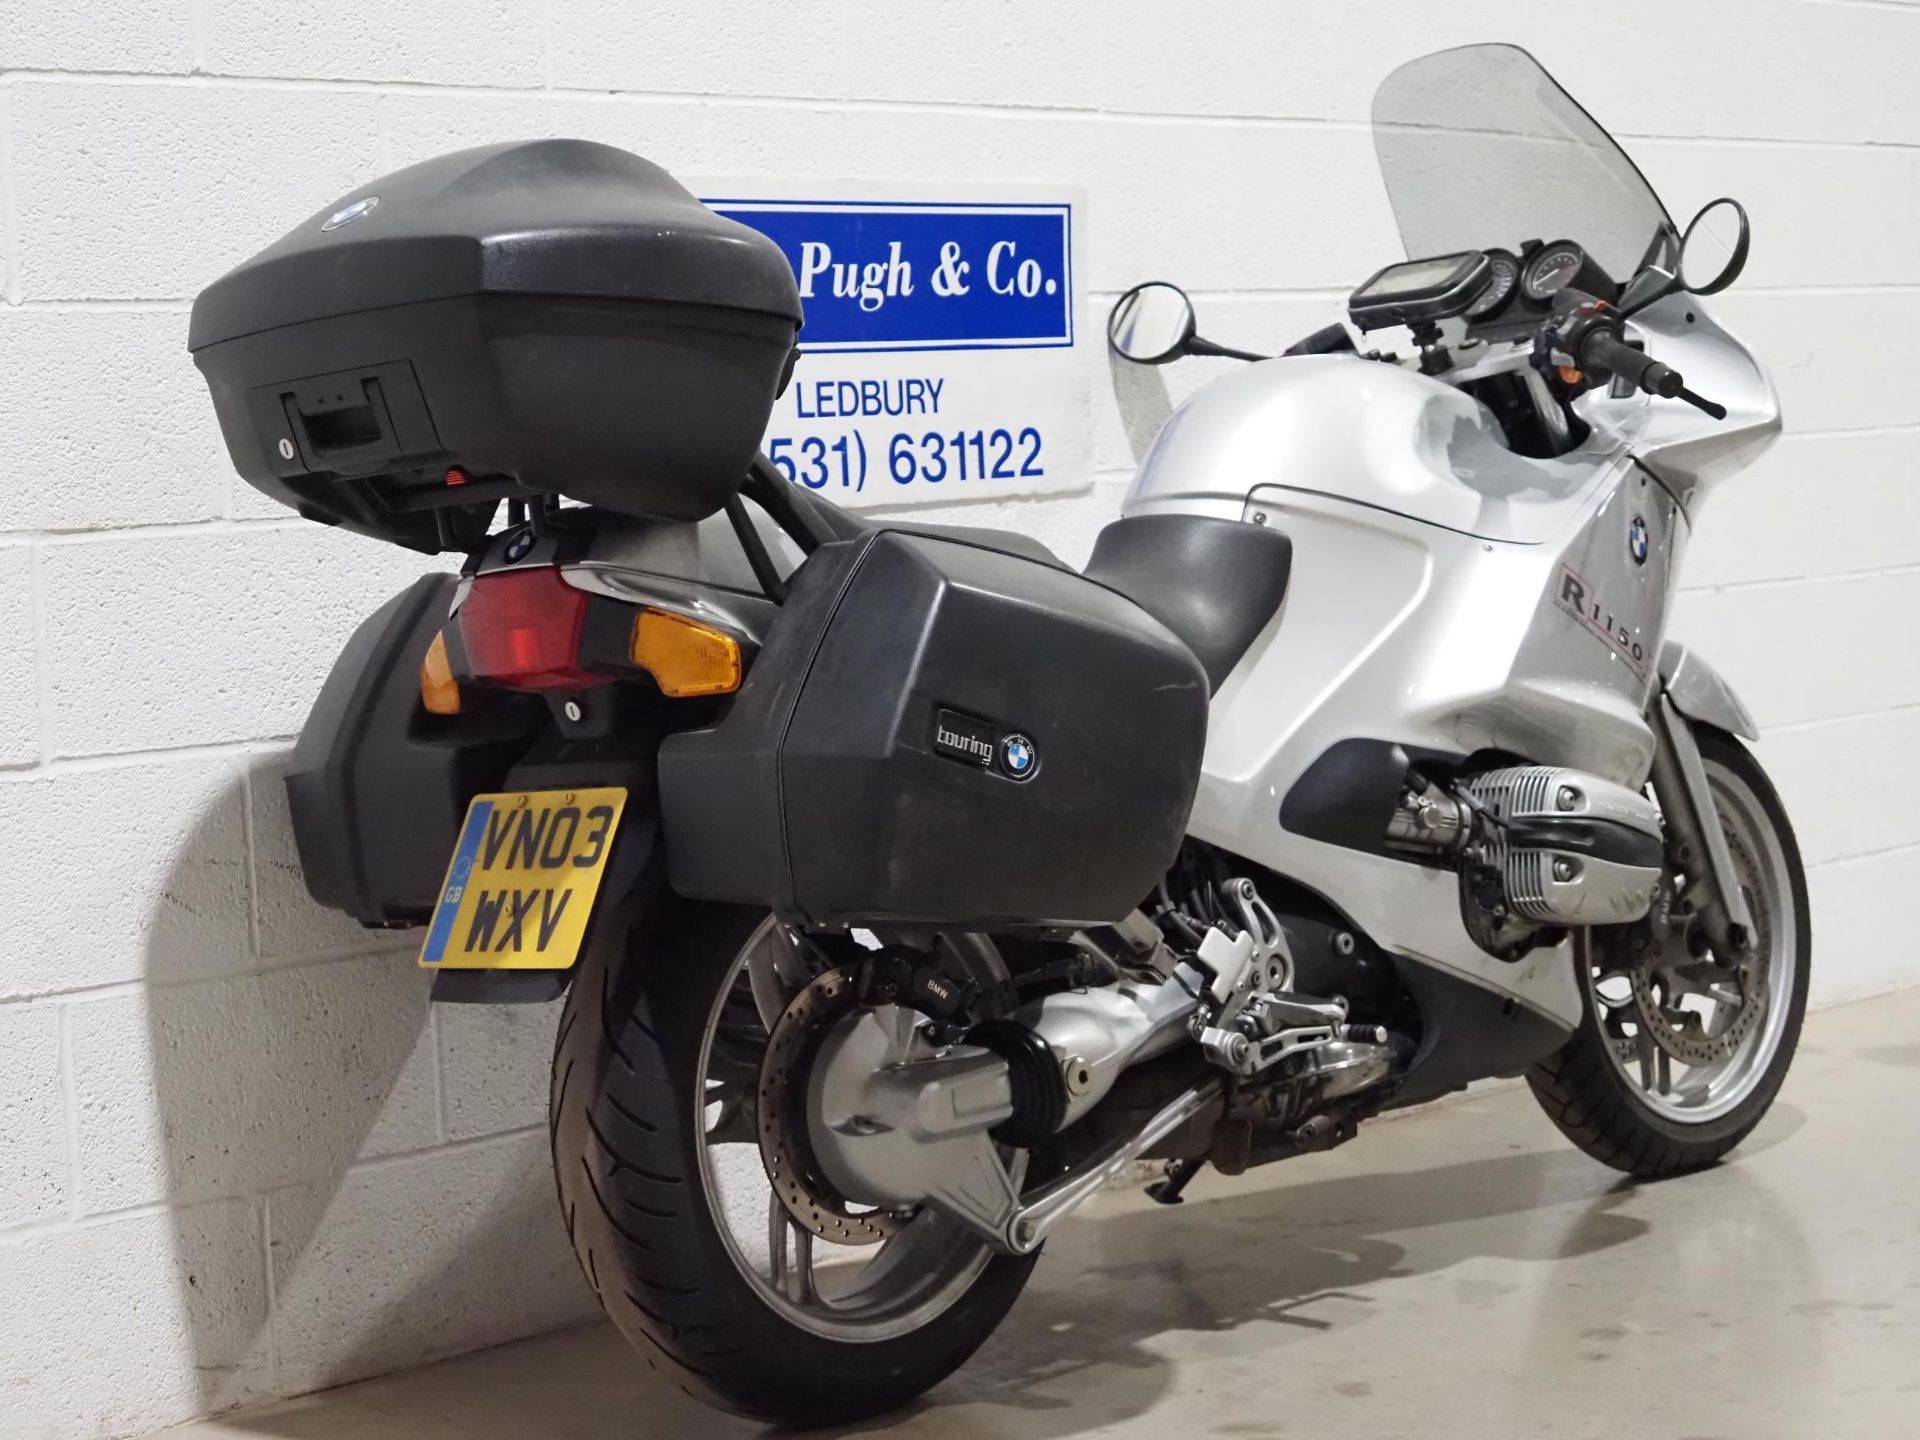 BMW R1150RS motorcycle. 2003. 1130cc. Runs and rides. MOT until 24.07.24. Recorded CAT D in 2014. - Image 3 of 5